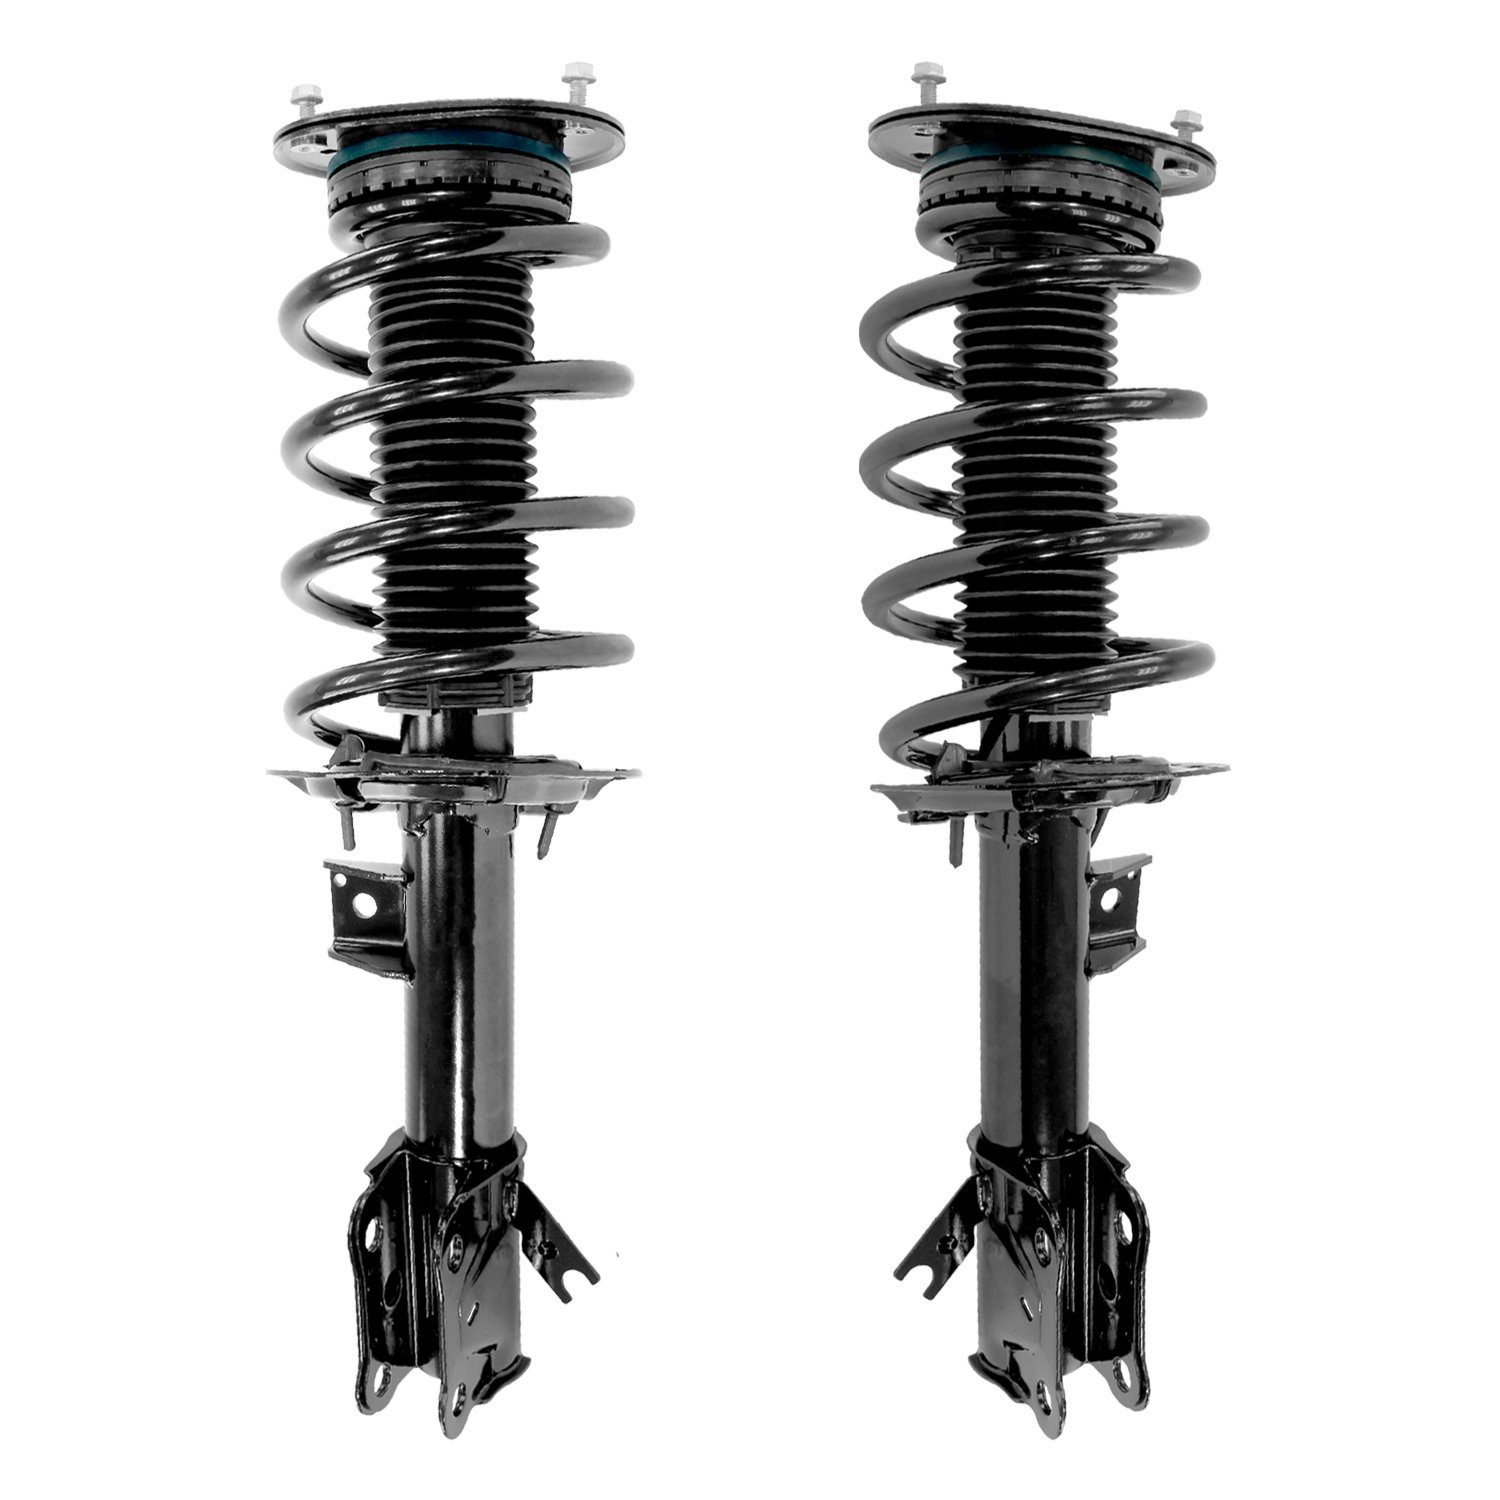 2-13521-13522-001 Front Suspension Strut & Coil Spring Assemby Set Fits Select Ford Edge, Lincoln Nautilus, Lincoln MKX